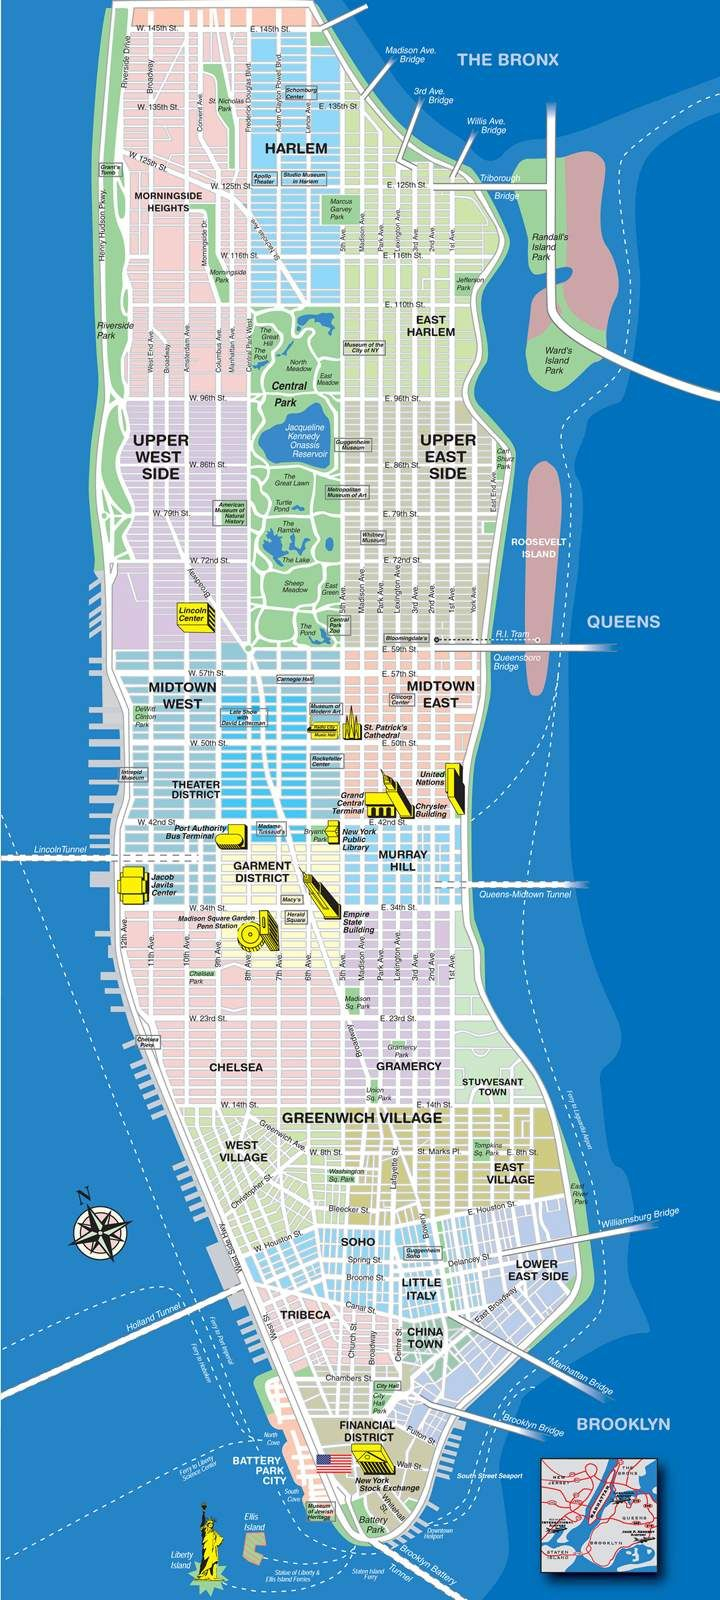 High-Resolution Map Of Manhattan For Print Or Download | Usa Travel - Printable Map Of Manhattan Pdf